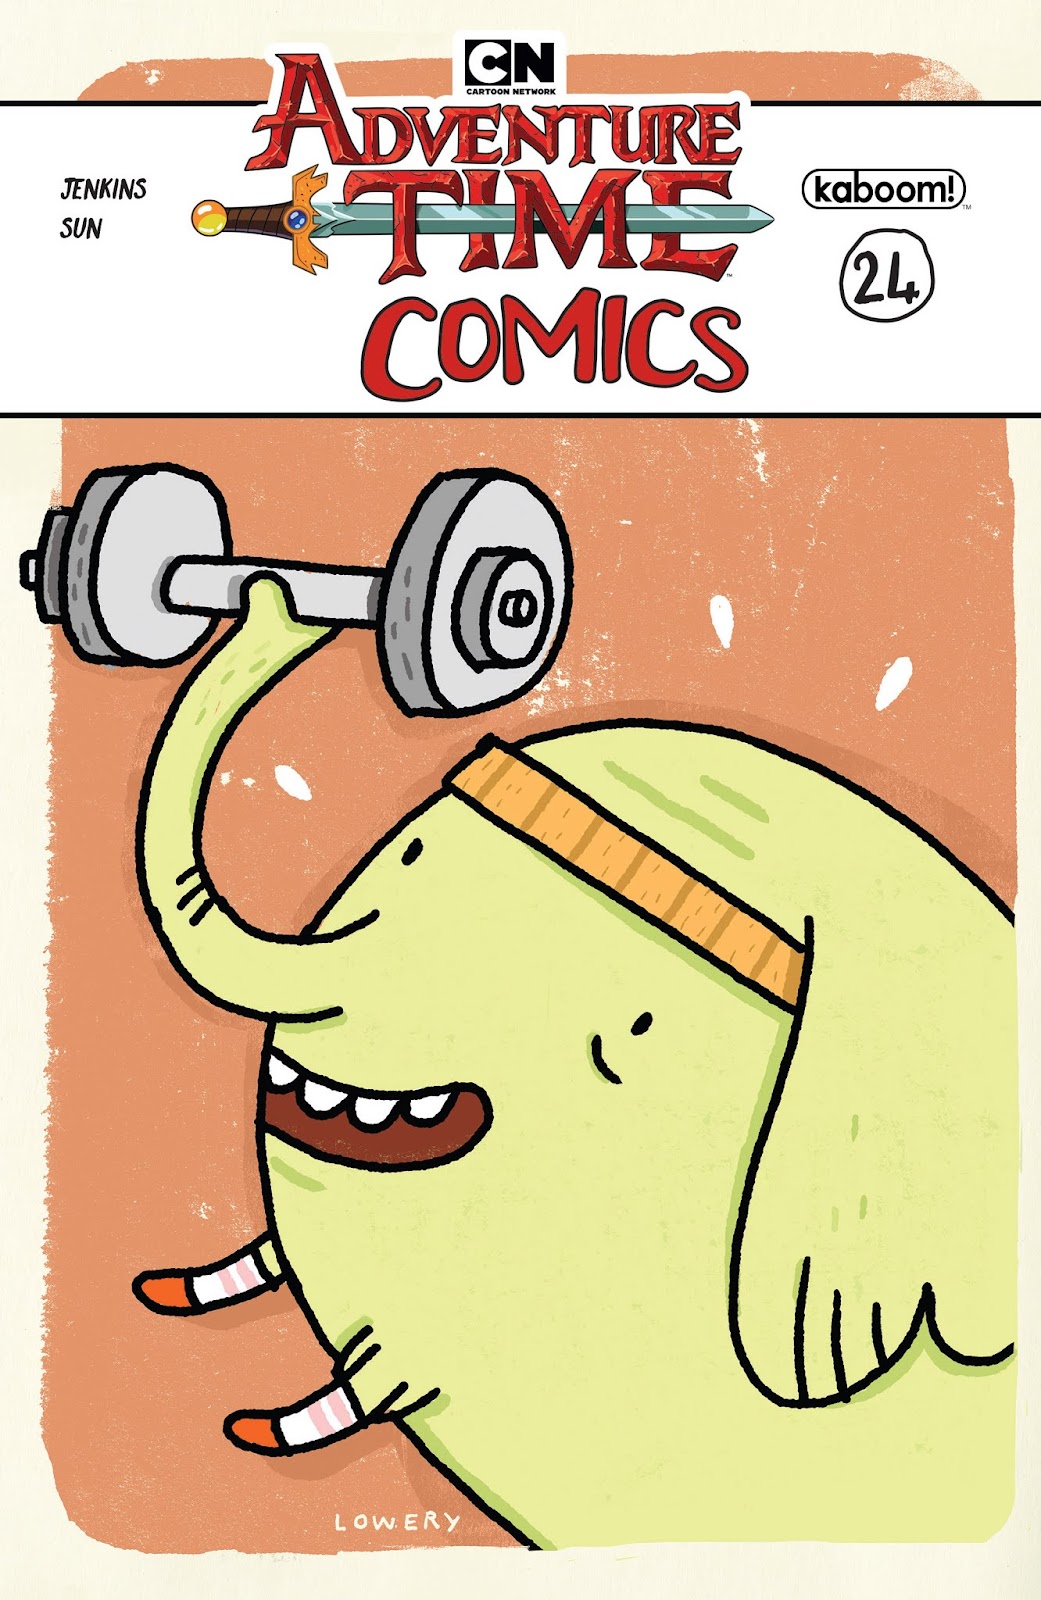 Adventure Time Comics issue 24 - Page 1